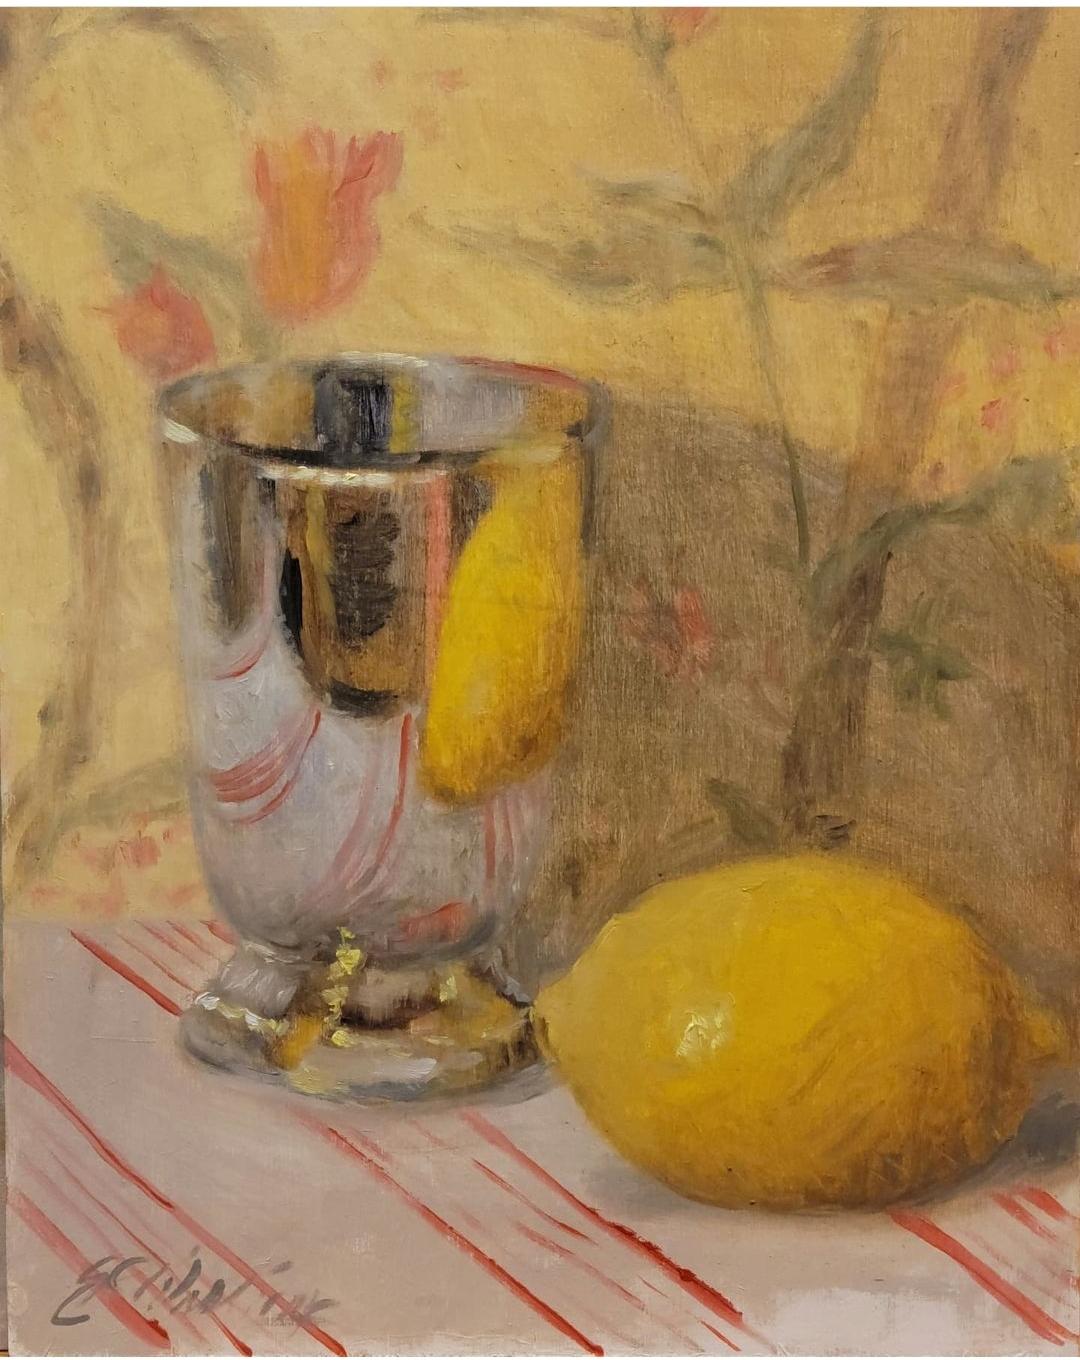 Silver Cup and Lemon by Ginny Williams Framed Still Life Oil on Board, Silver